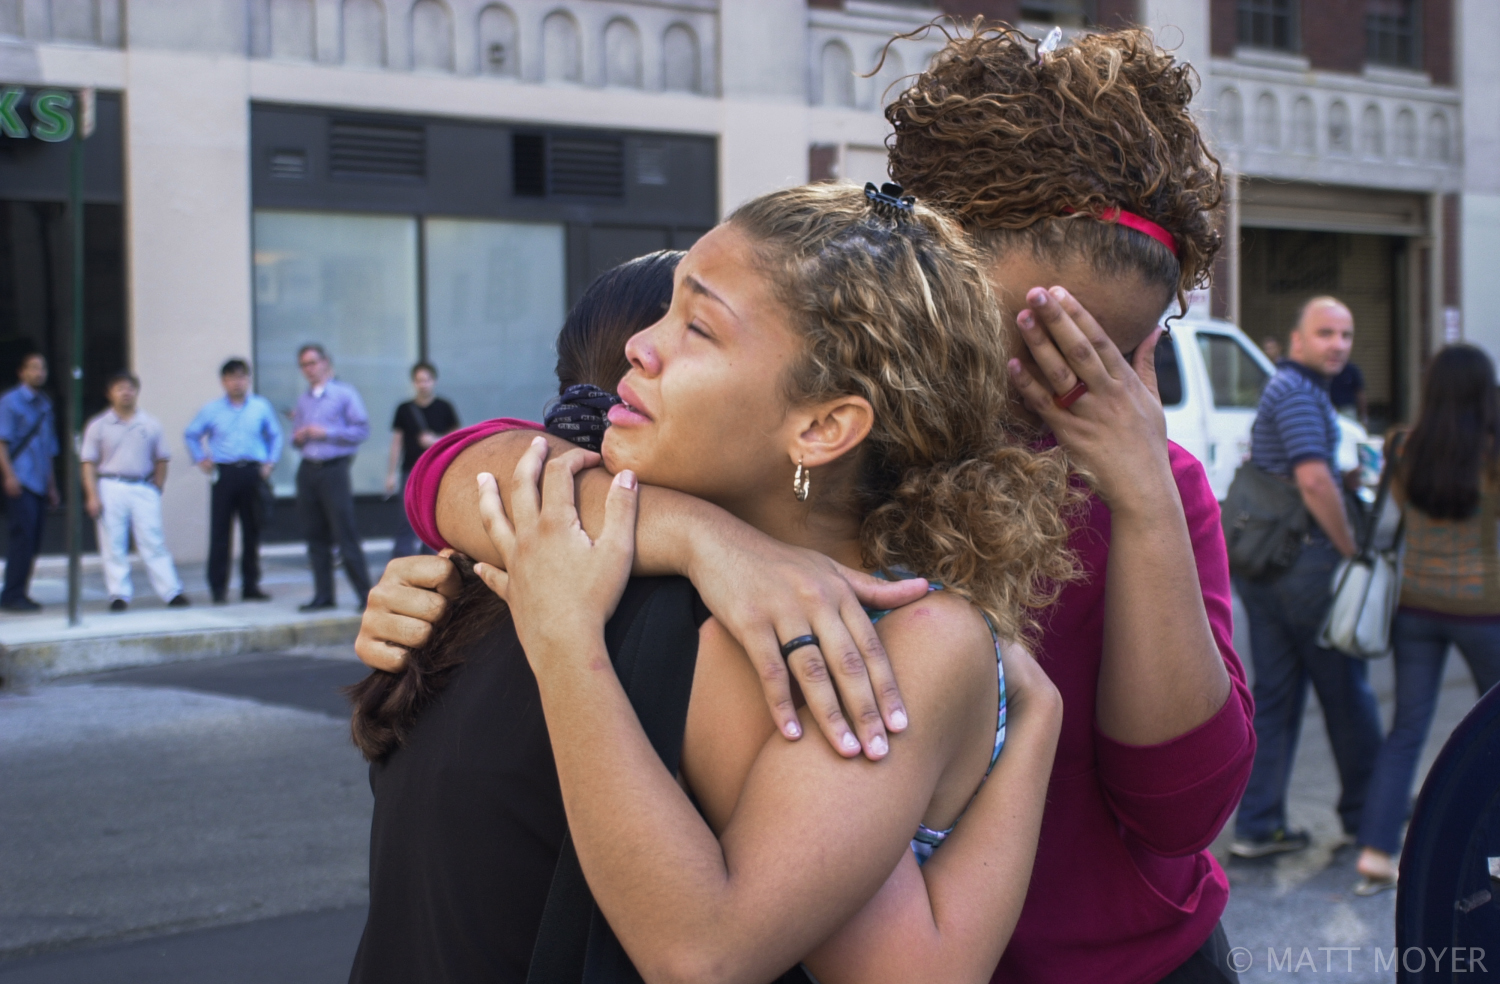  Lisa Bianco (right) and two women comfort one another during the terrorist attack on The World Trade Center on Sept. 11, 2001. 